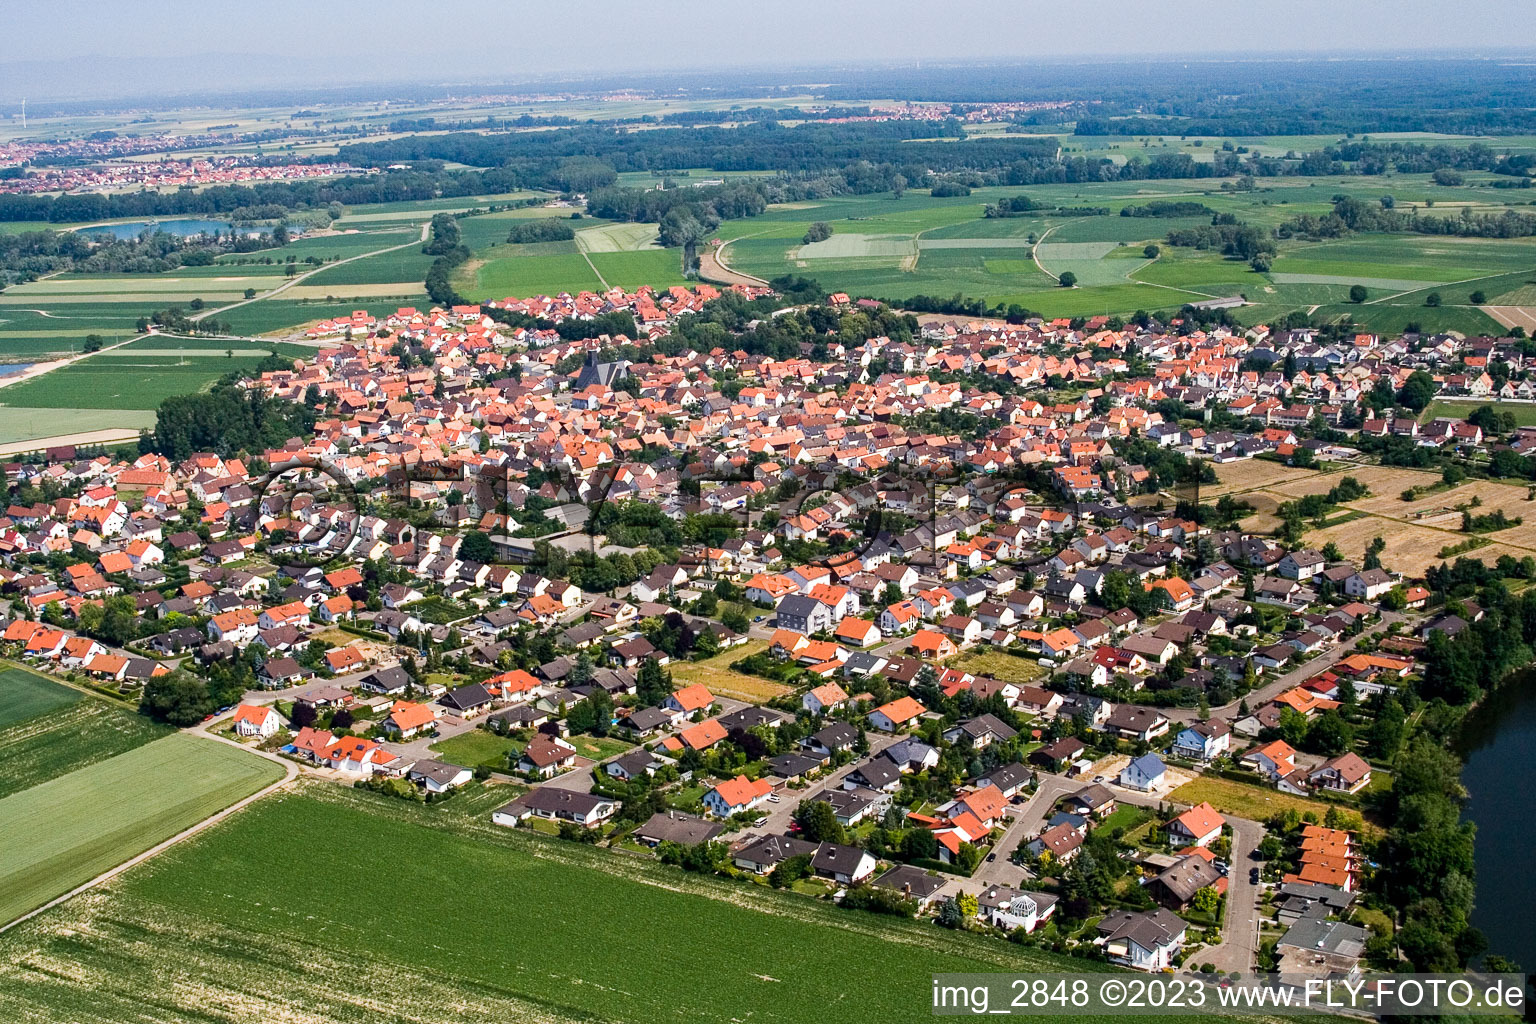 Aerial view of From the south in Leimersheim in the state Rhineland-Palatinate, Germany